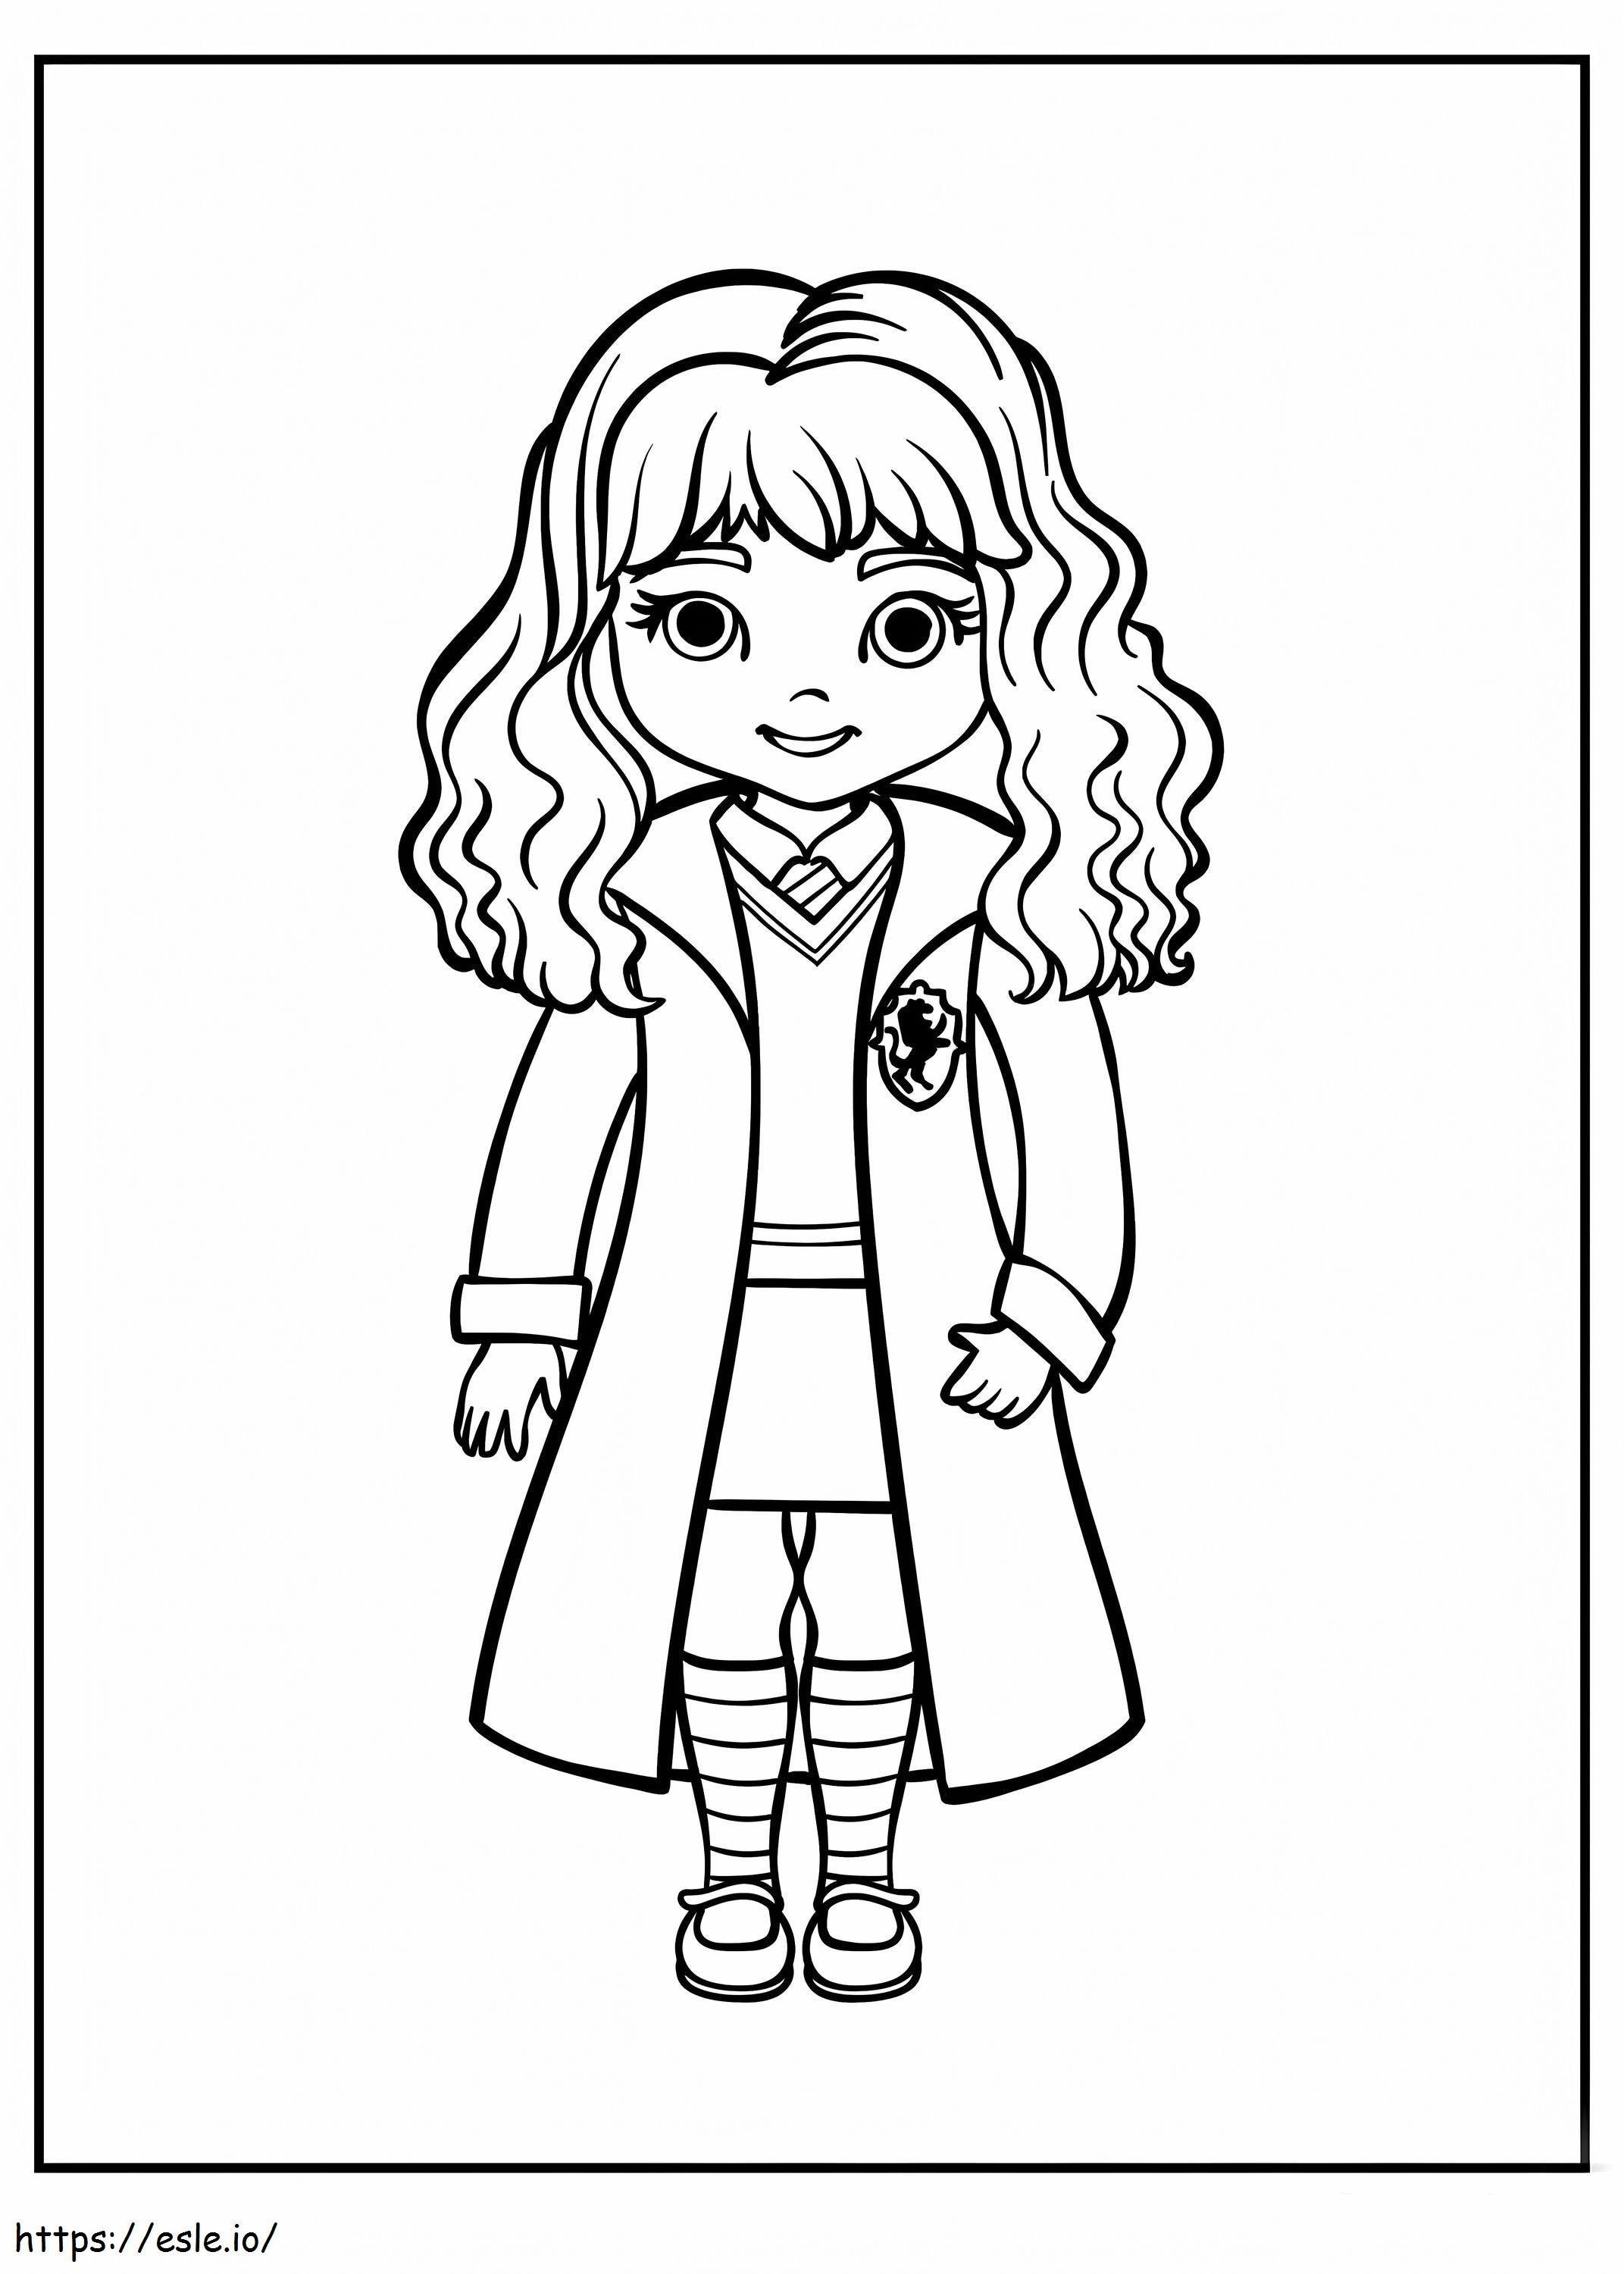 Cartoon Hermione Granger coloring page